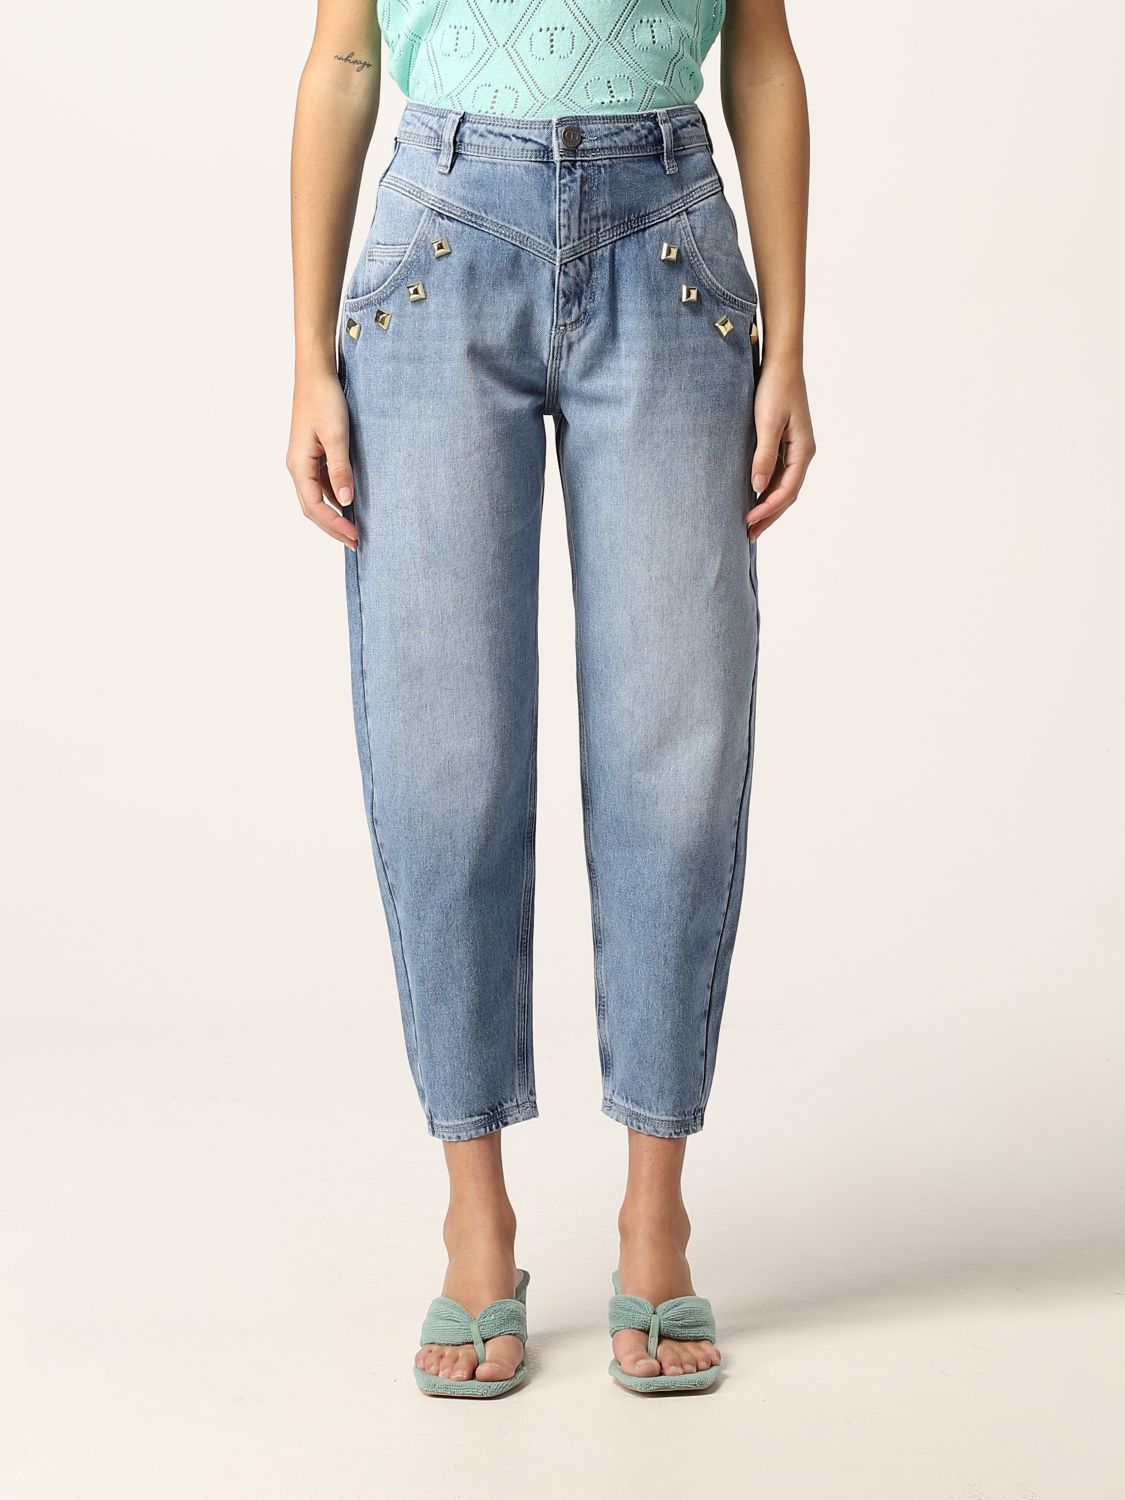 Twinset jeans in washed denim with applications